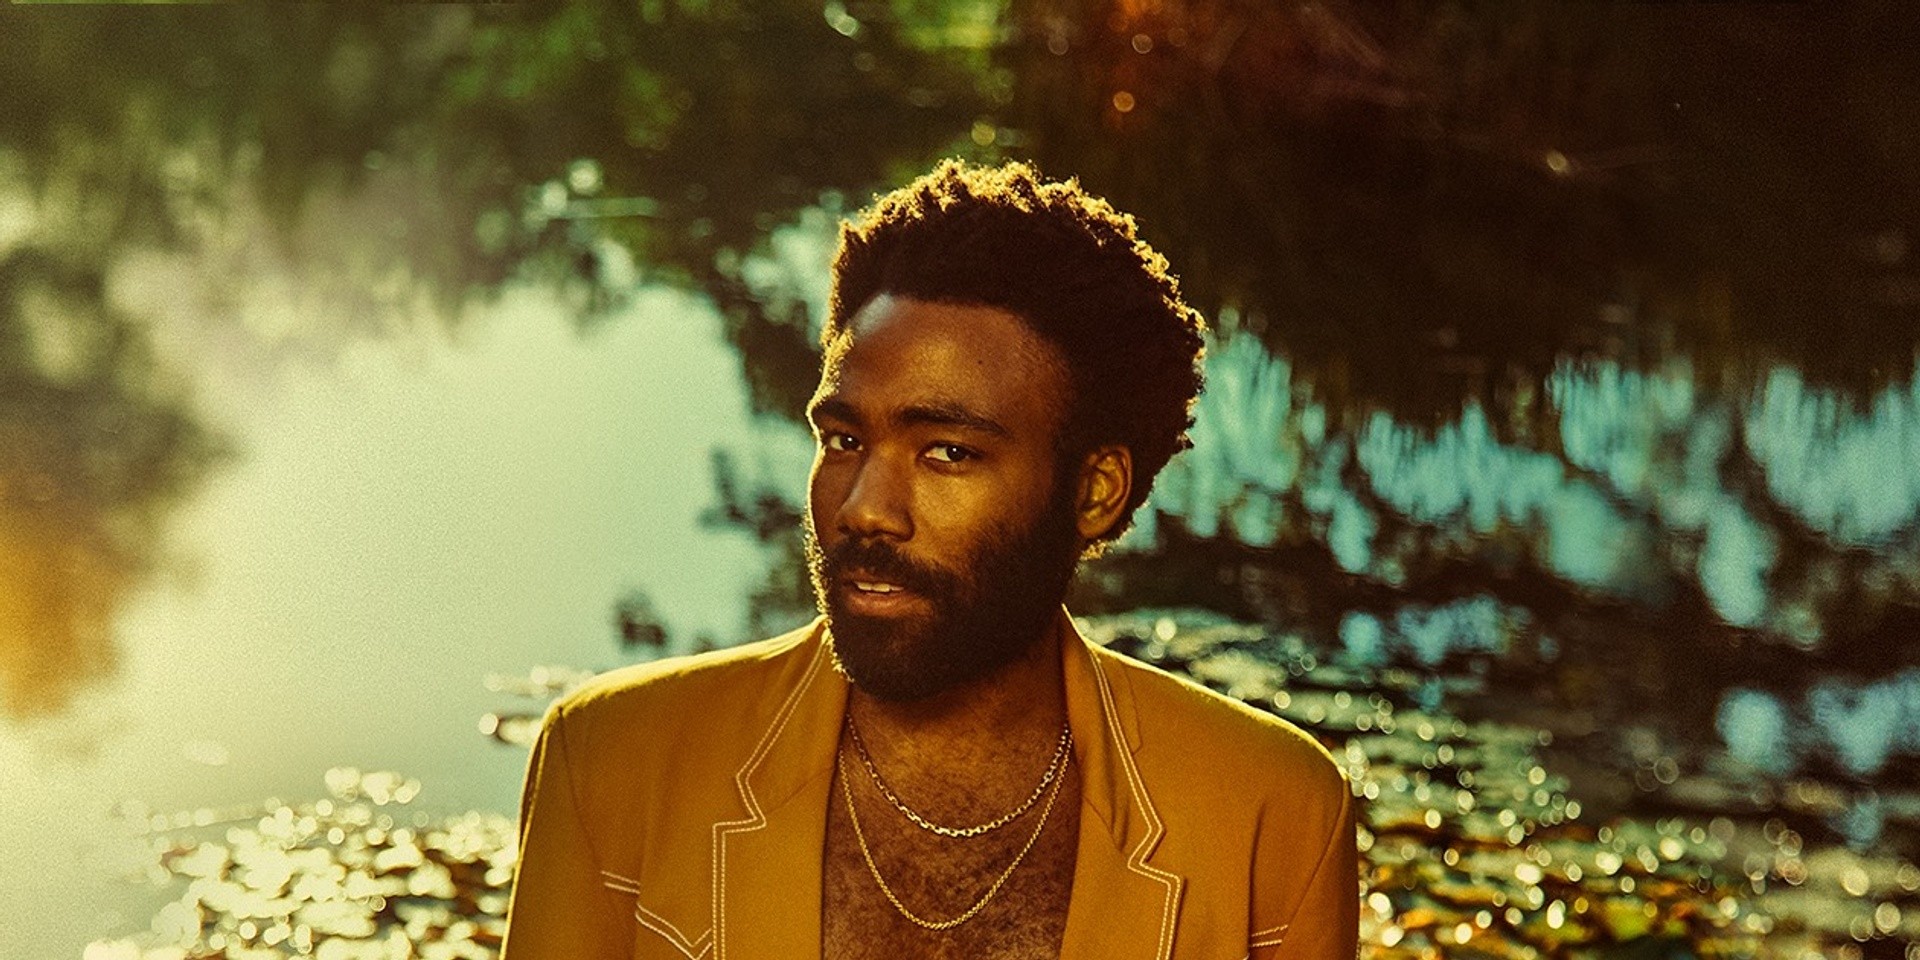 Childish Gambino releases more new music, a Summer Pack perfect for a beach day – listen